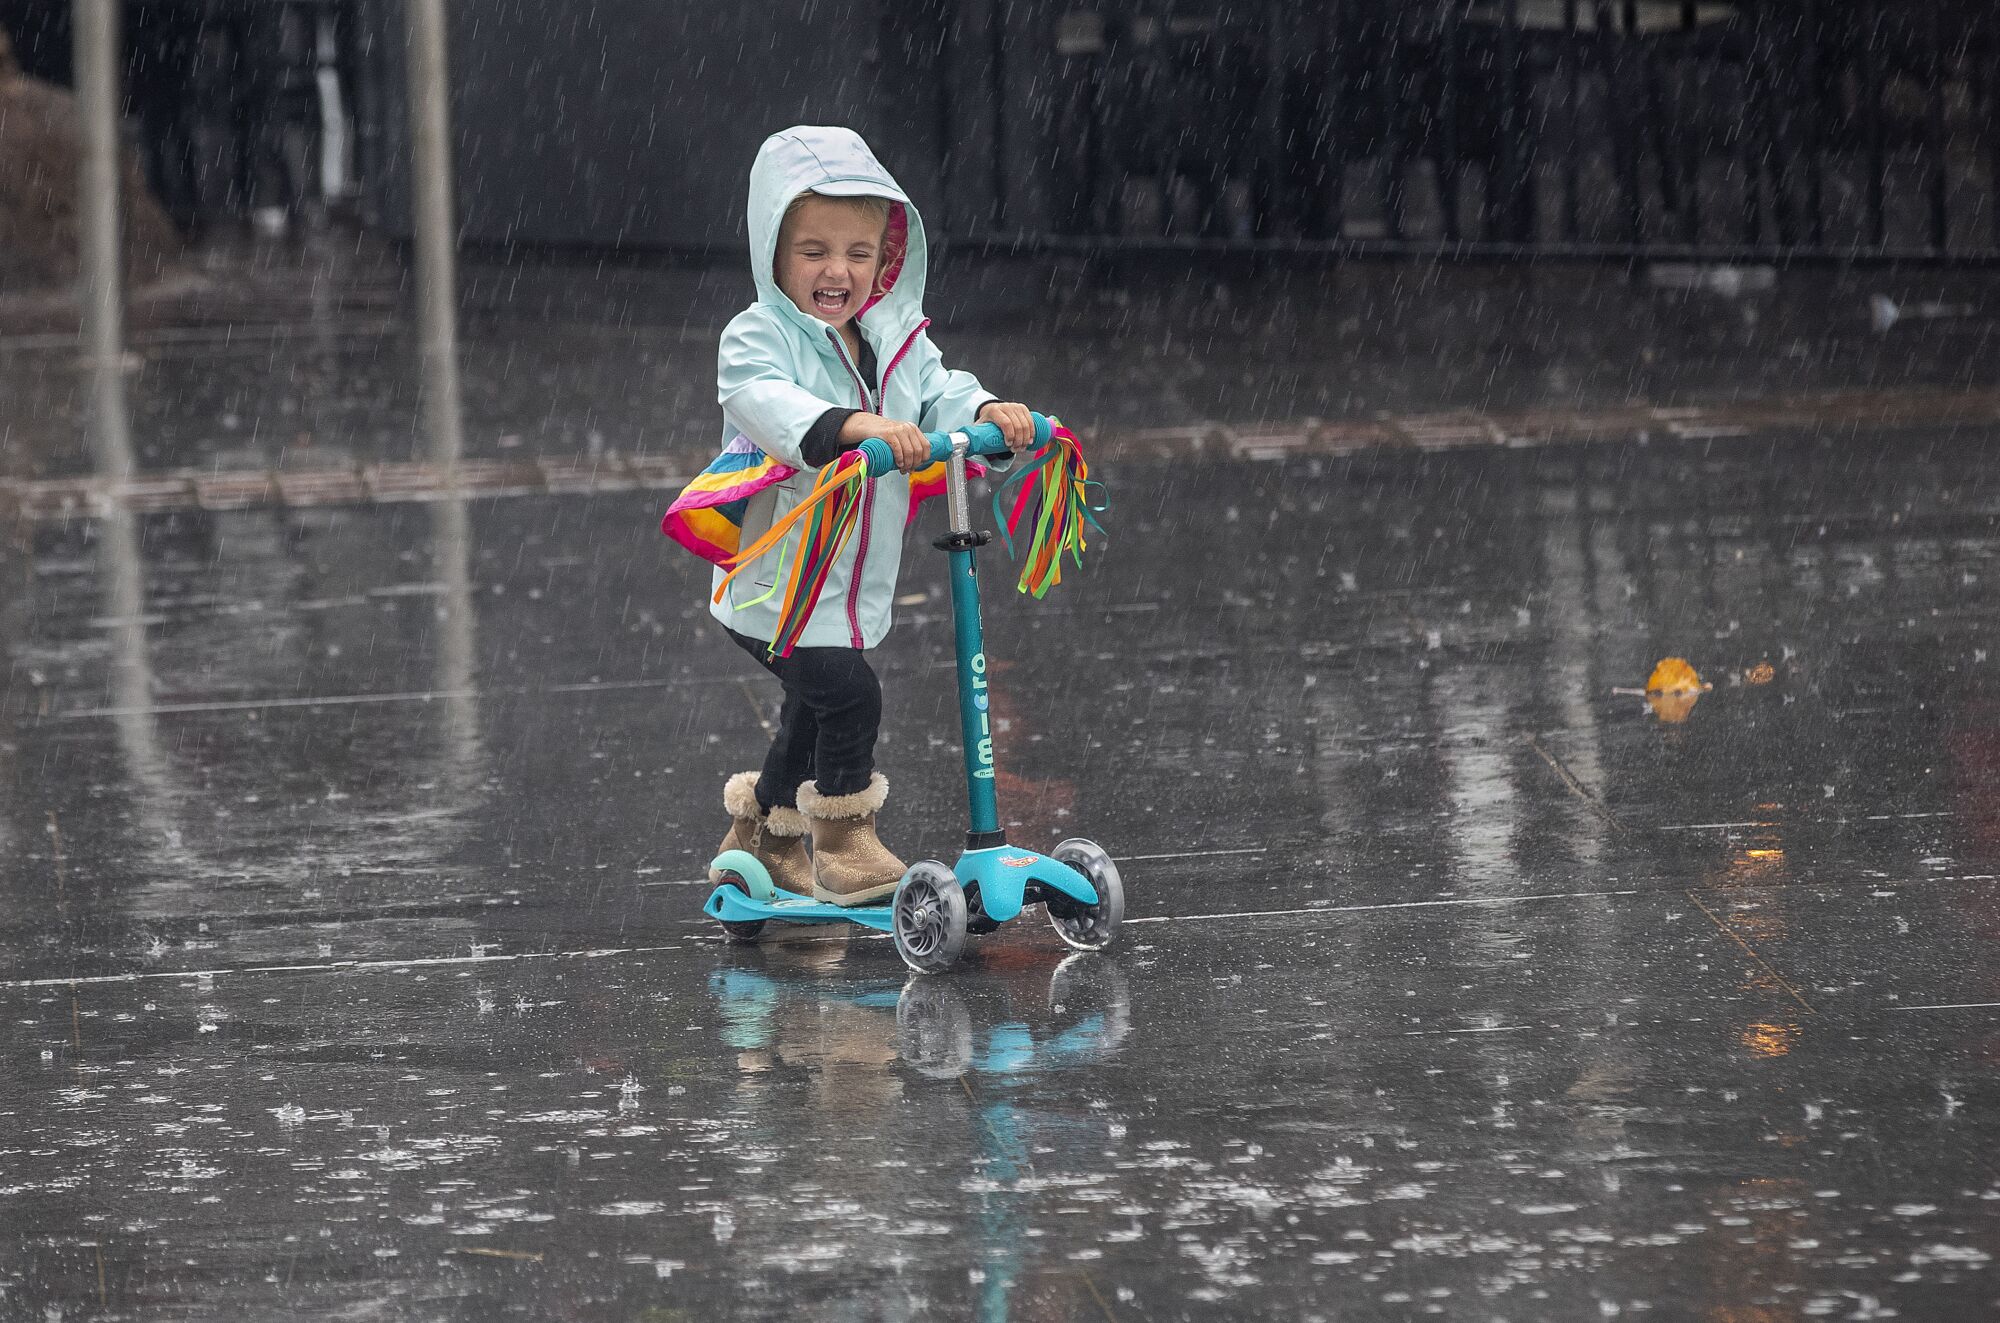 A young girl rides her scooter in the rain